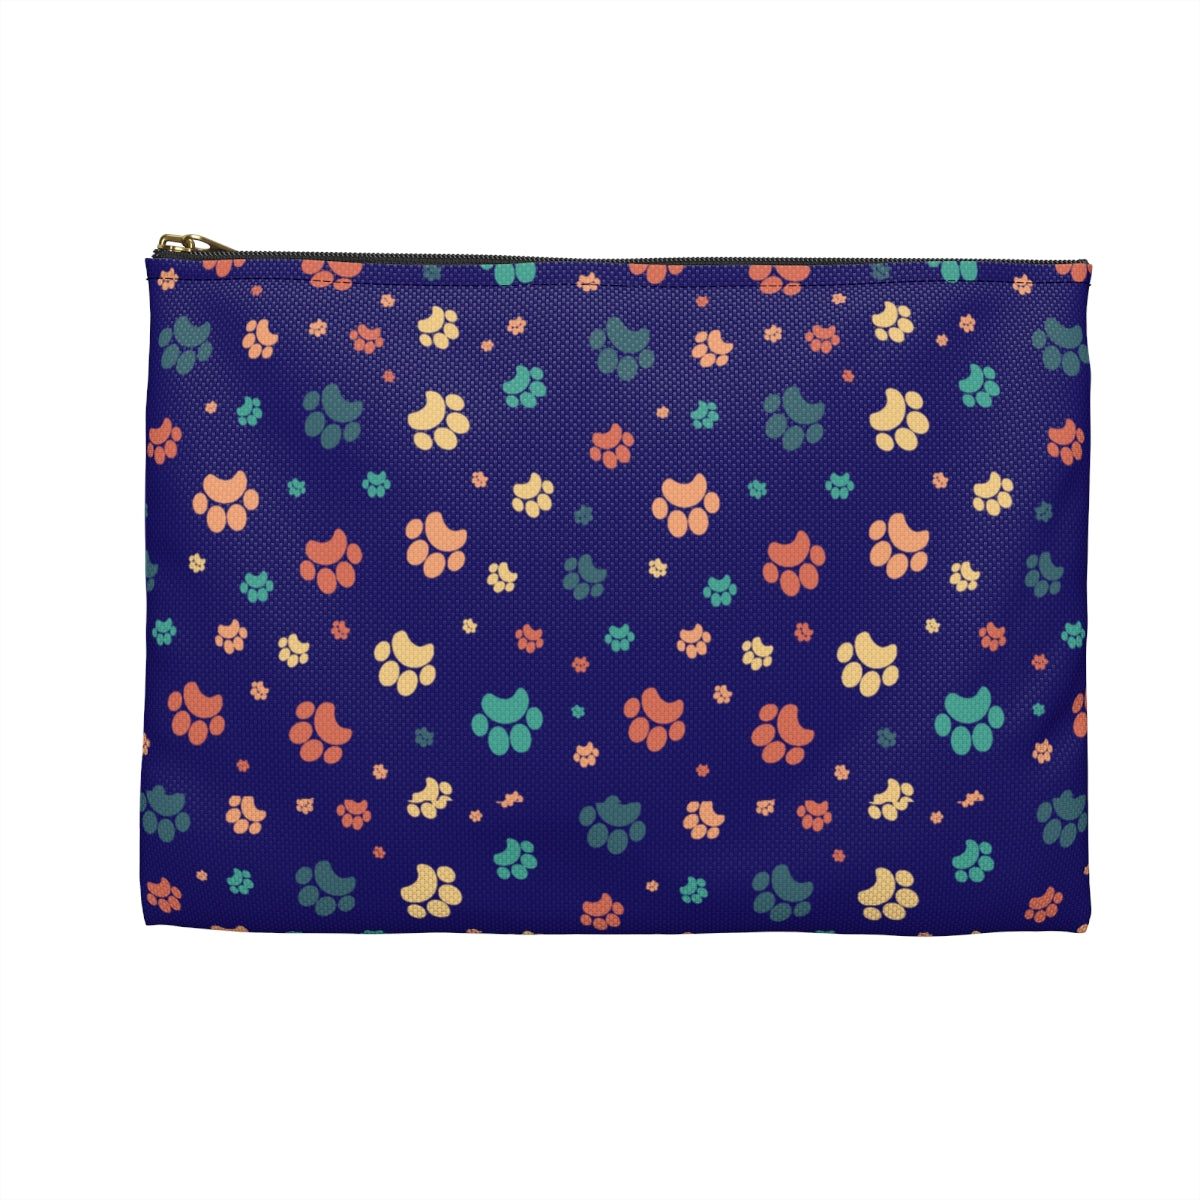 "Paw Print Pattern" Accessory Pouch